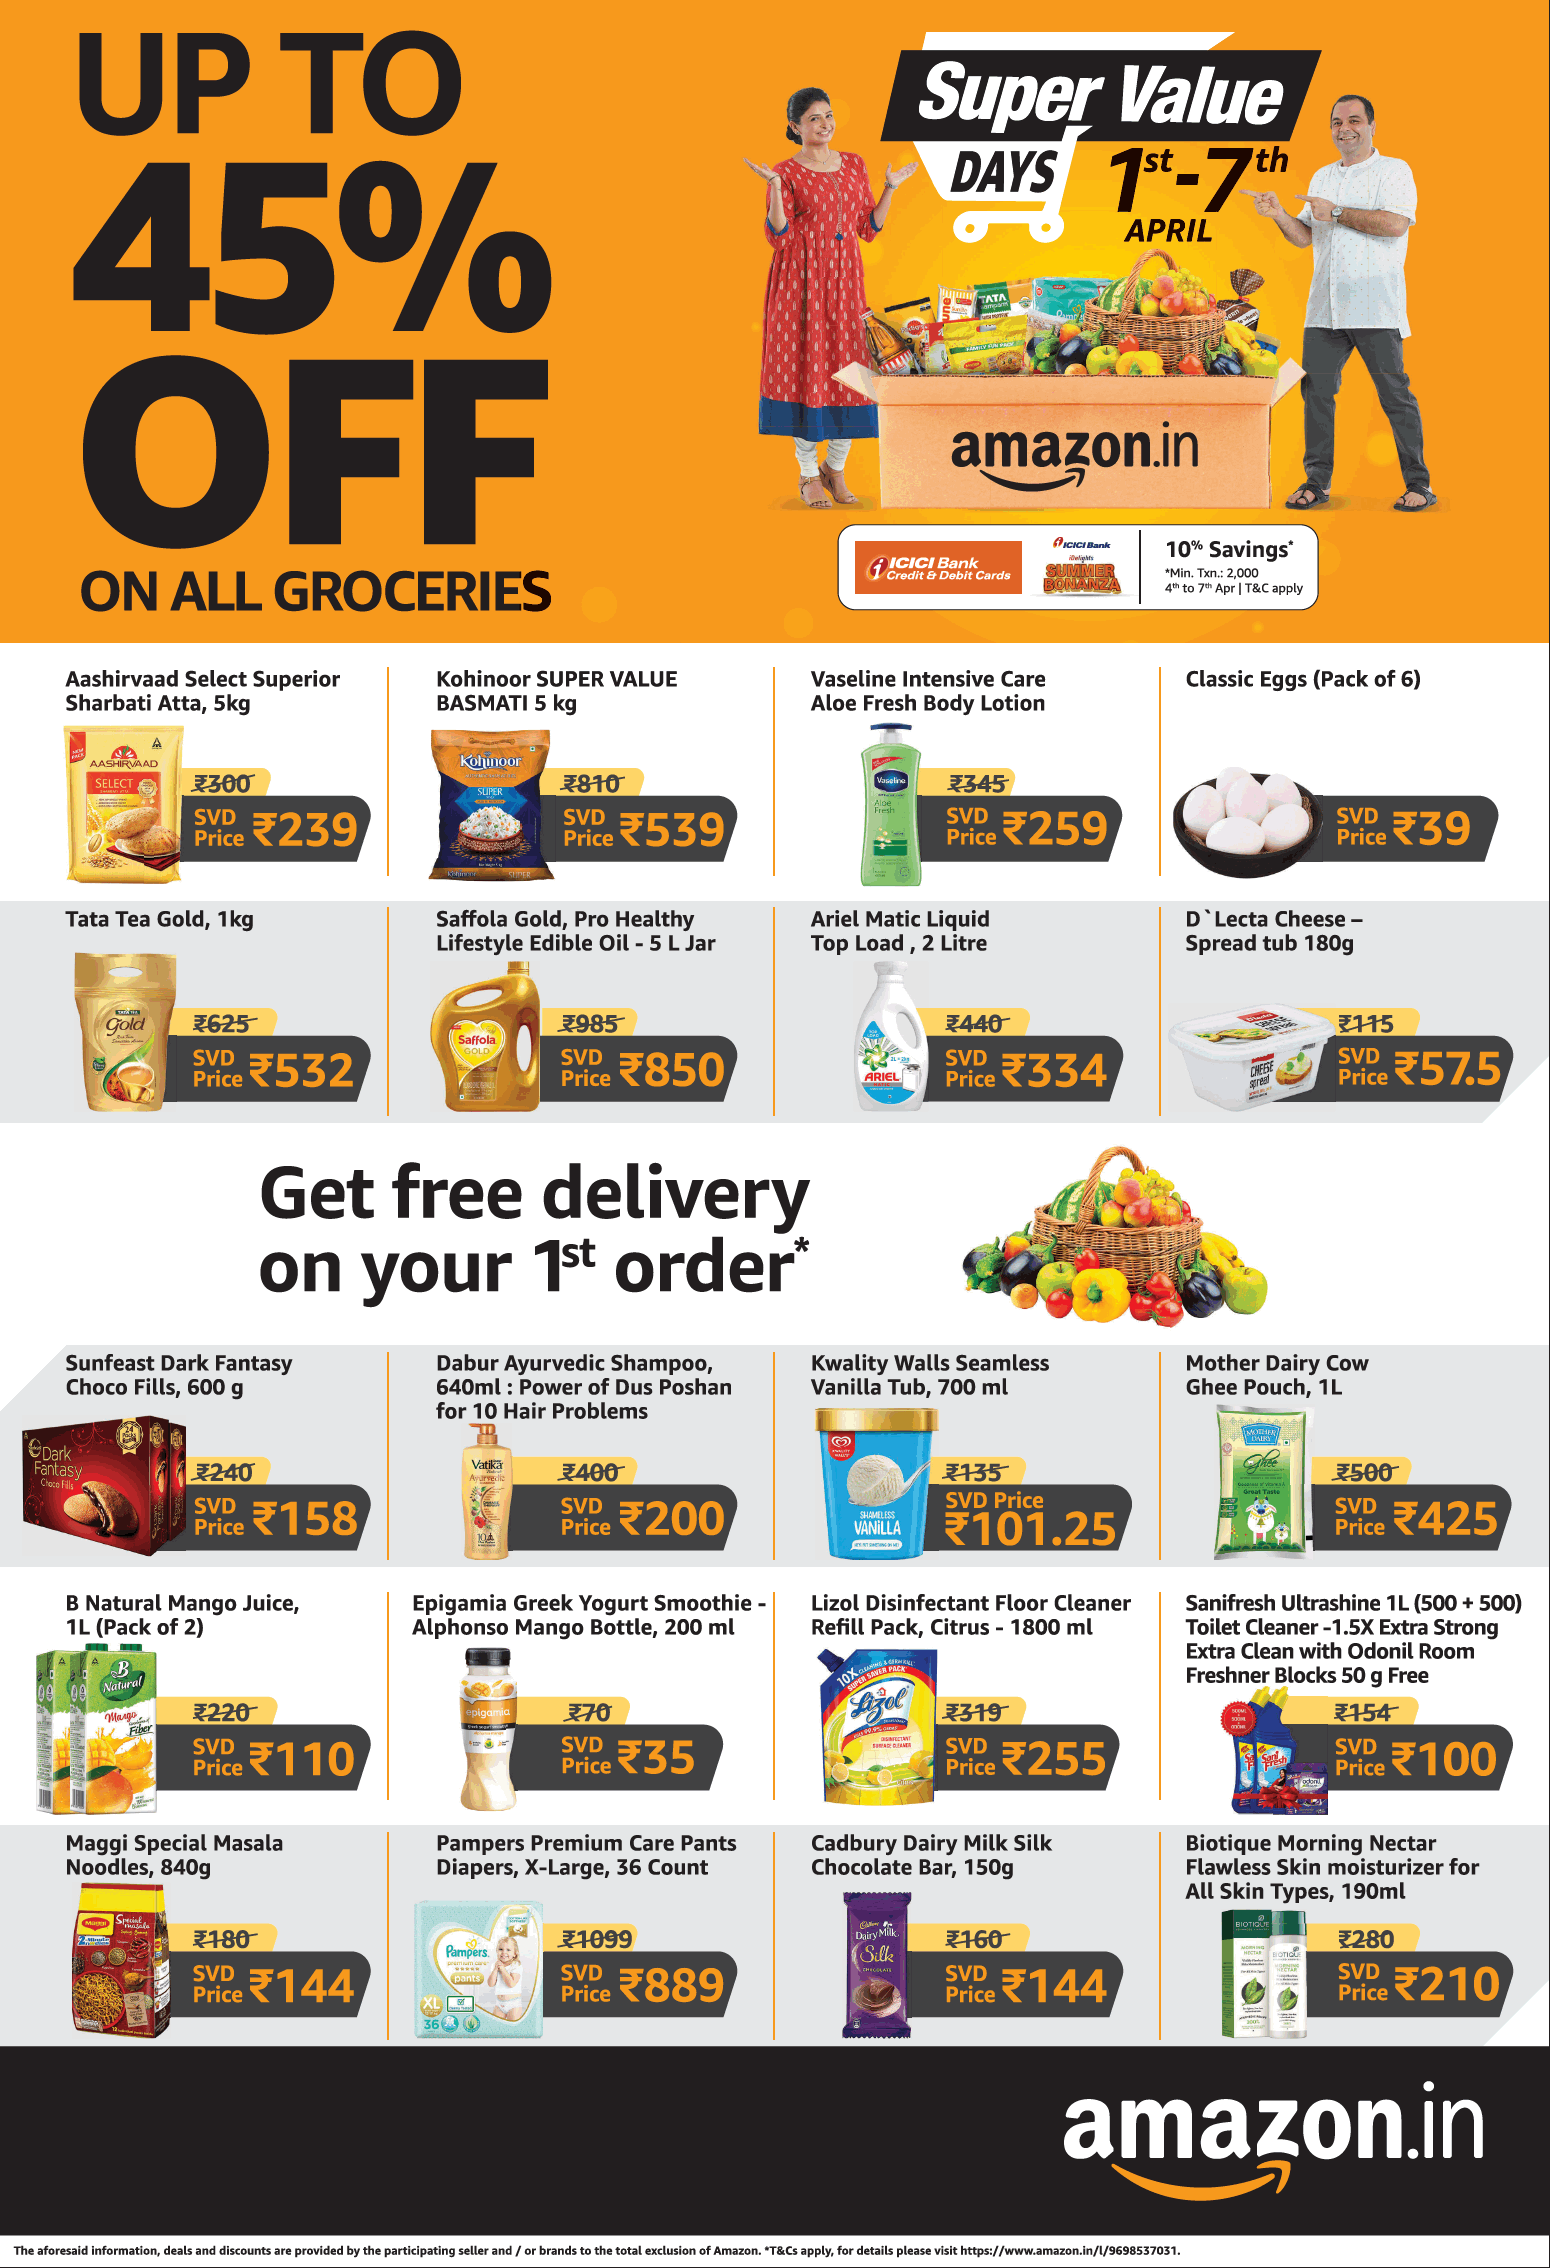 amazon-in-up-to-45%-off-on-all-groceries-ad-times-of-india-delhi-04-04-2021